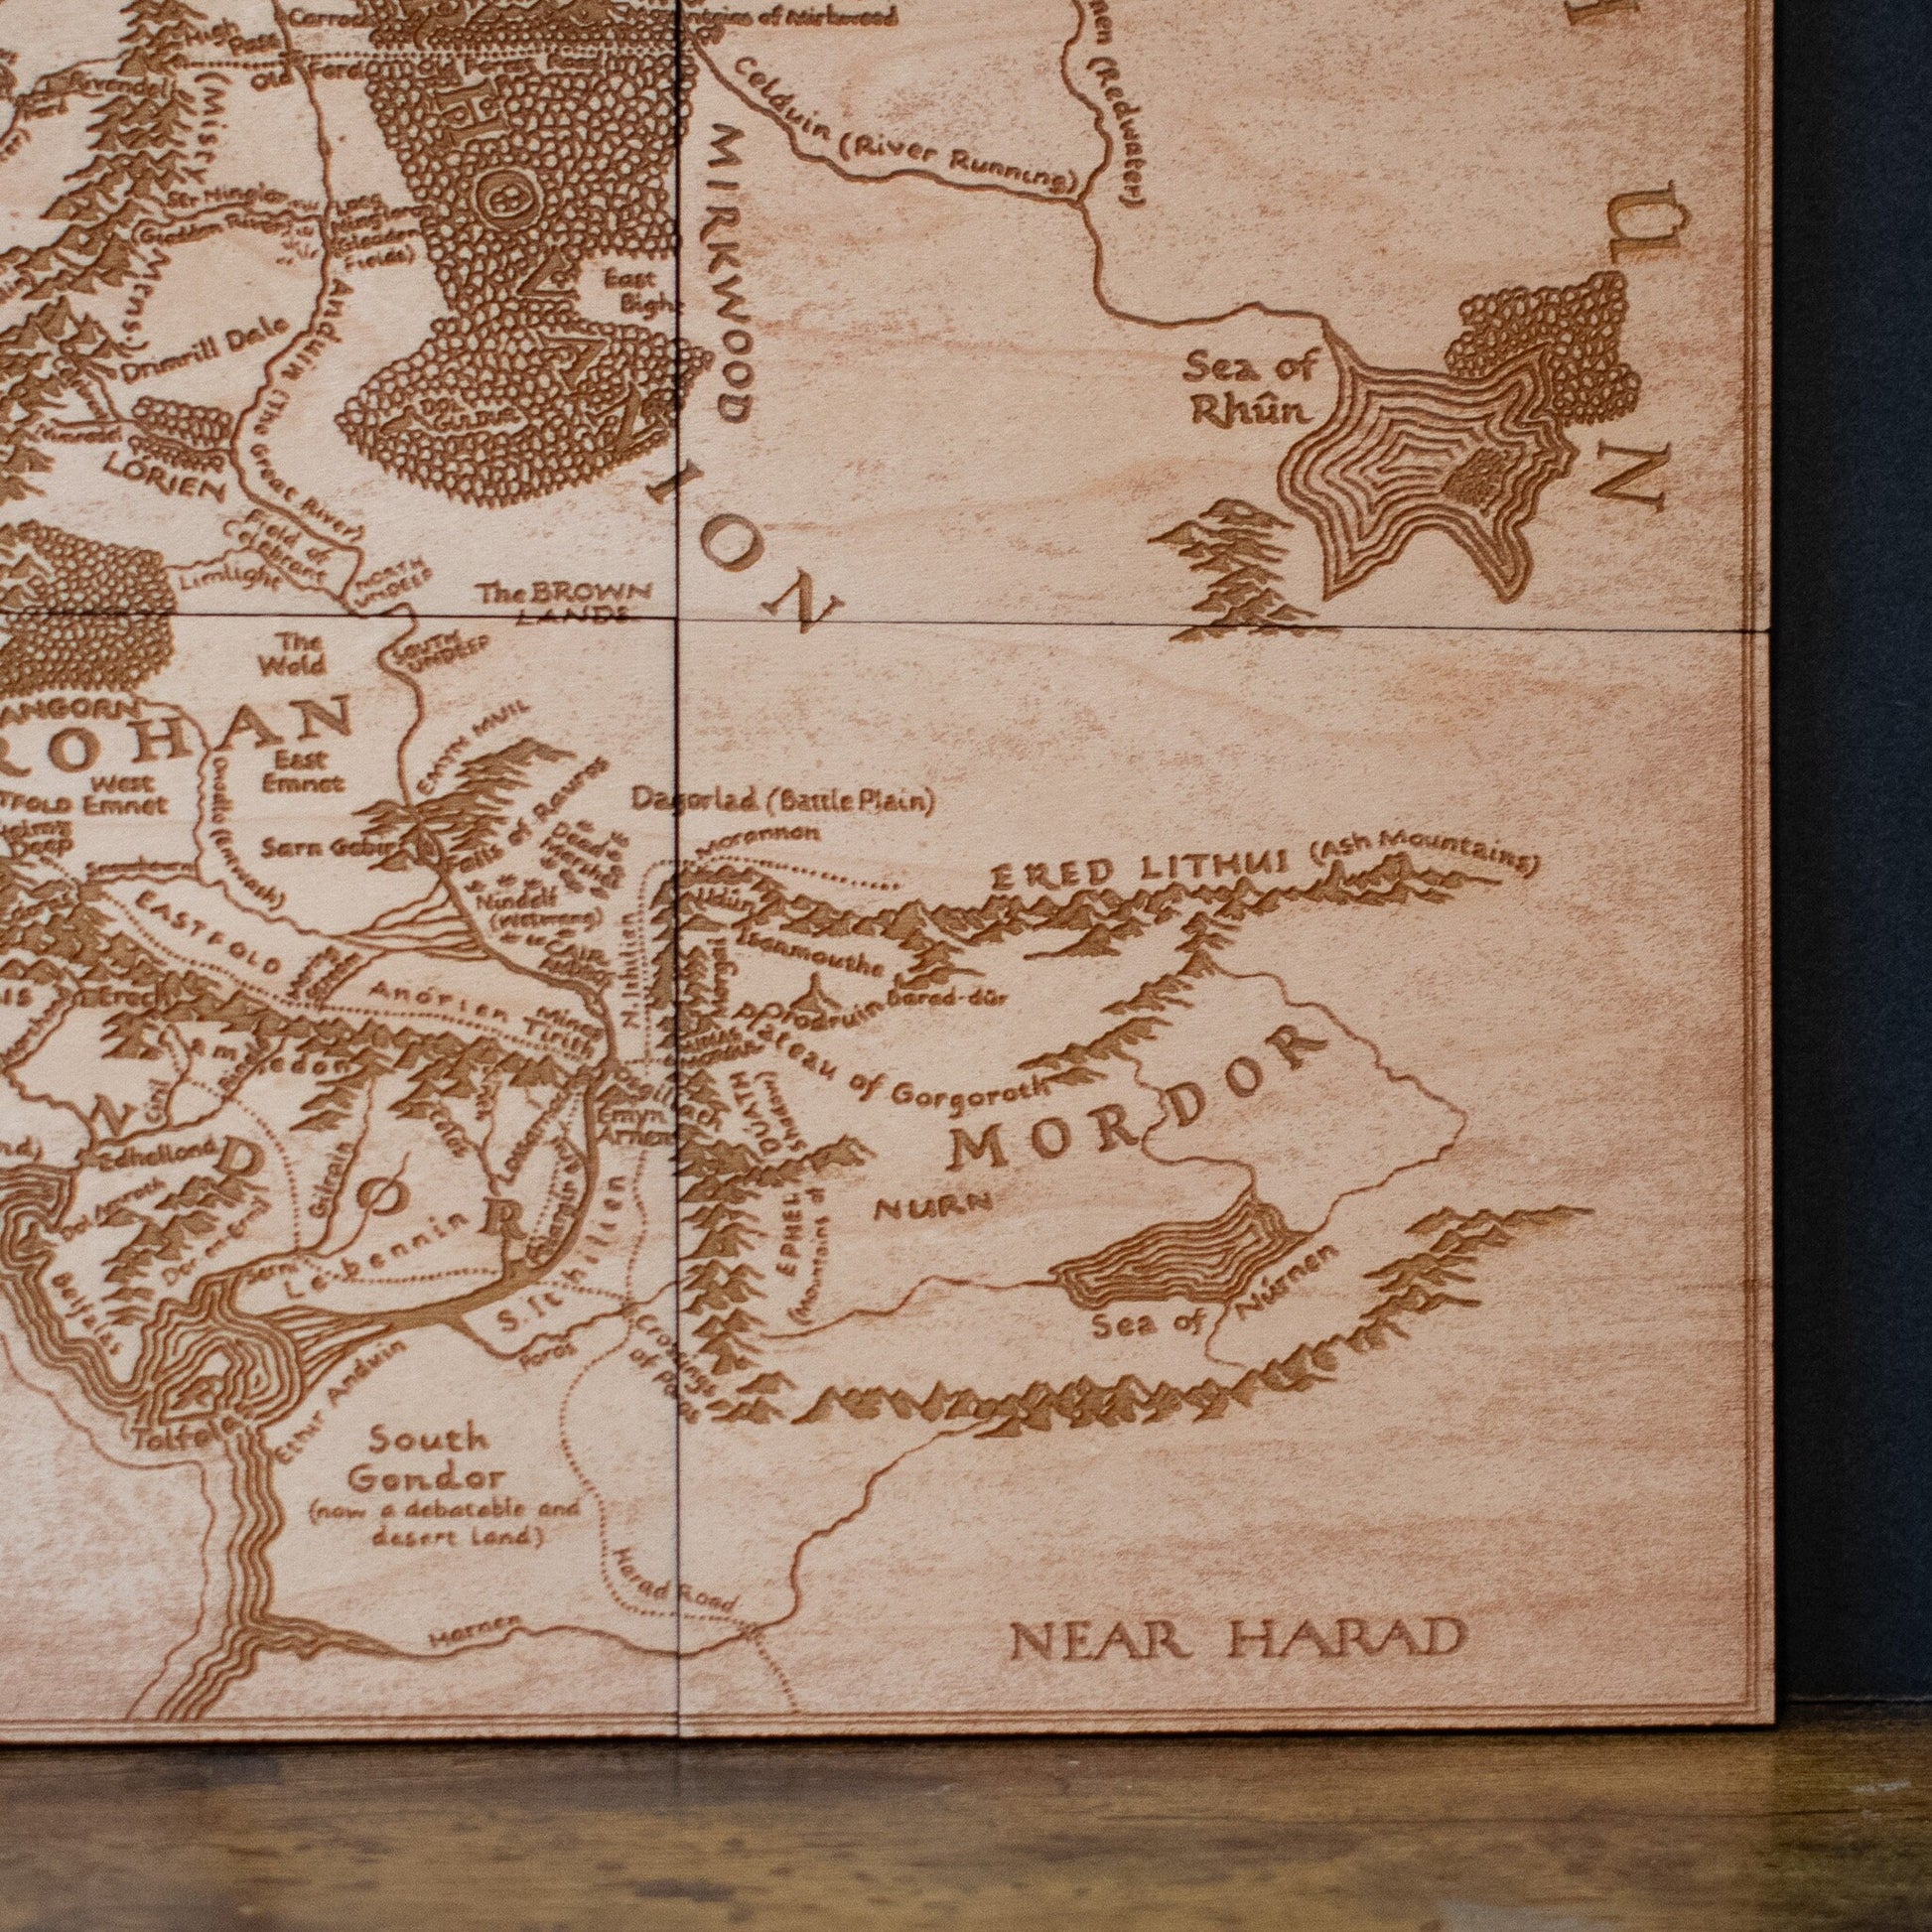 Lord of the Rings Coasters, LOTR Map Coasters, Lord of the Rings Gift Idea, Wood Map, LOTR Home Decor